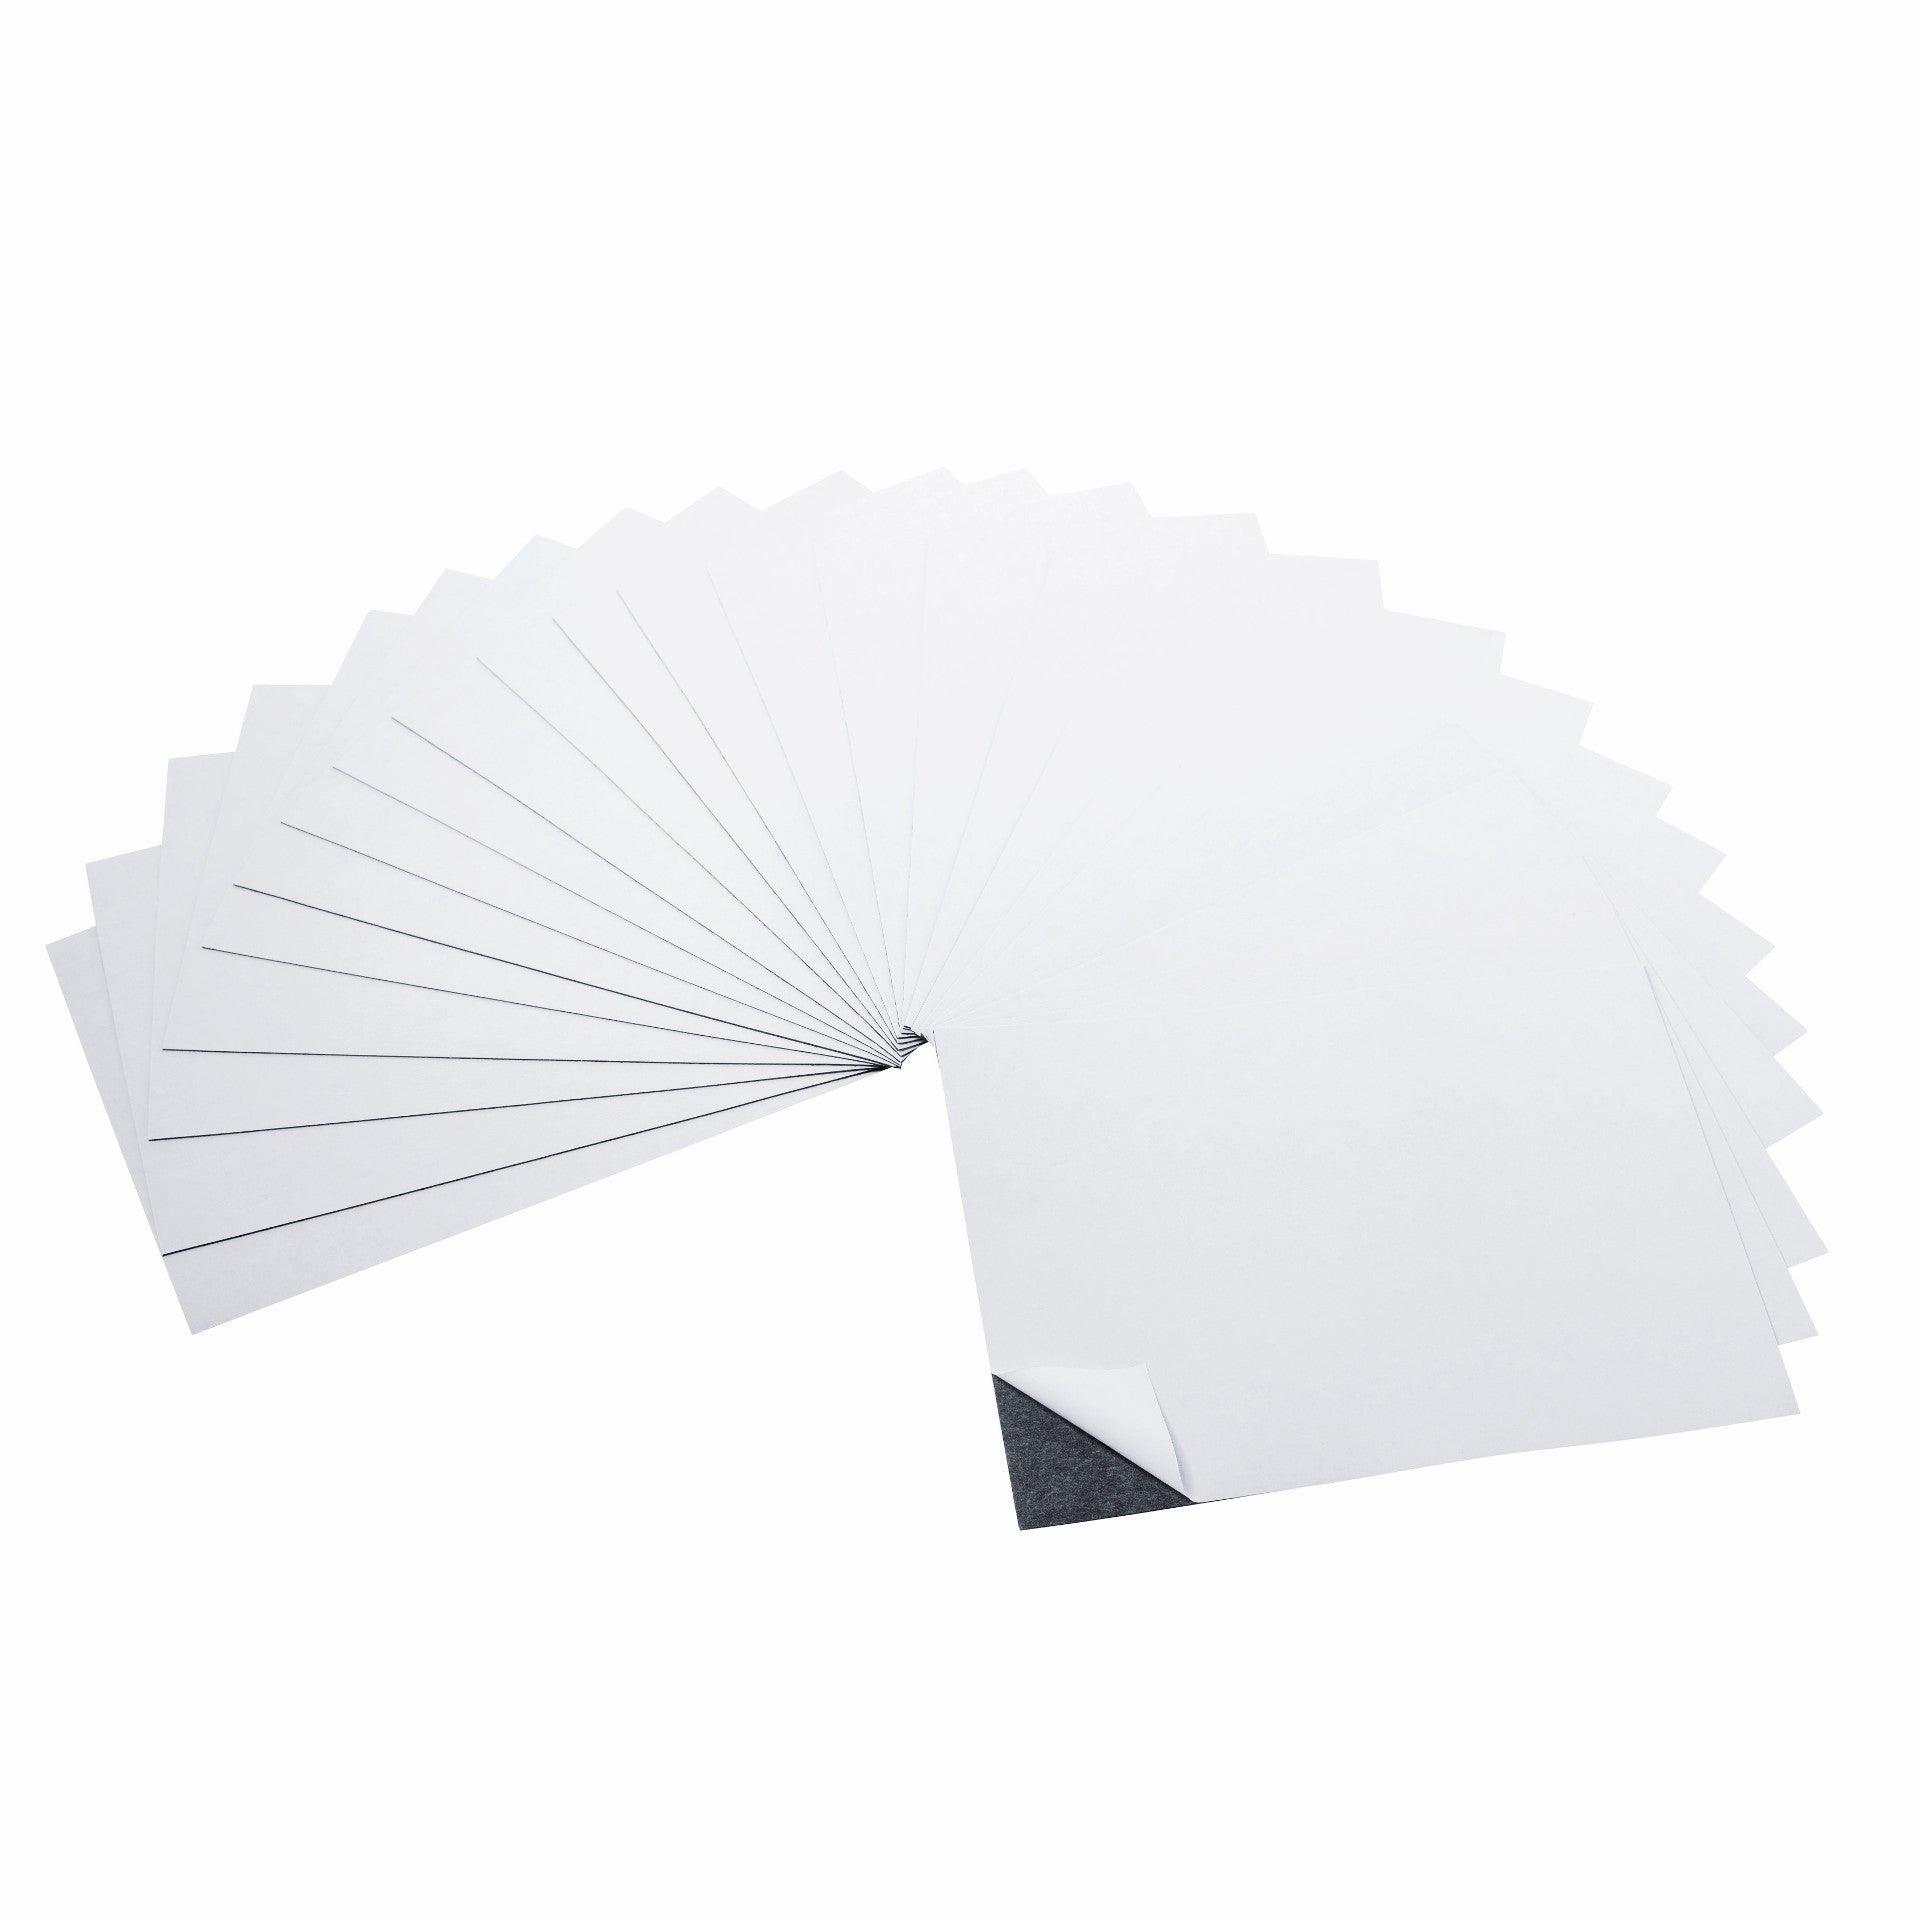 30 mil Adhesive Magnetic Business Card Peel & Stick Magnets